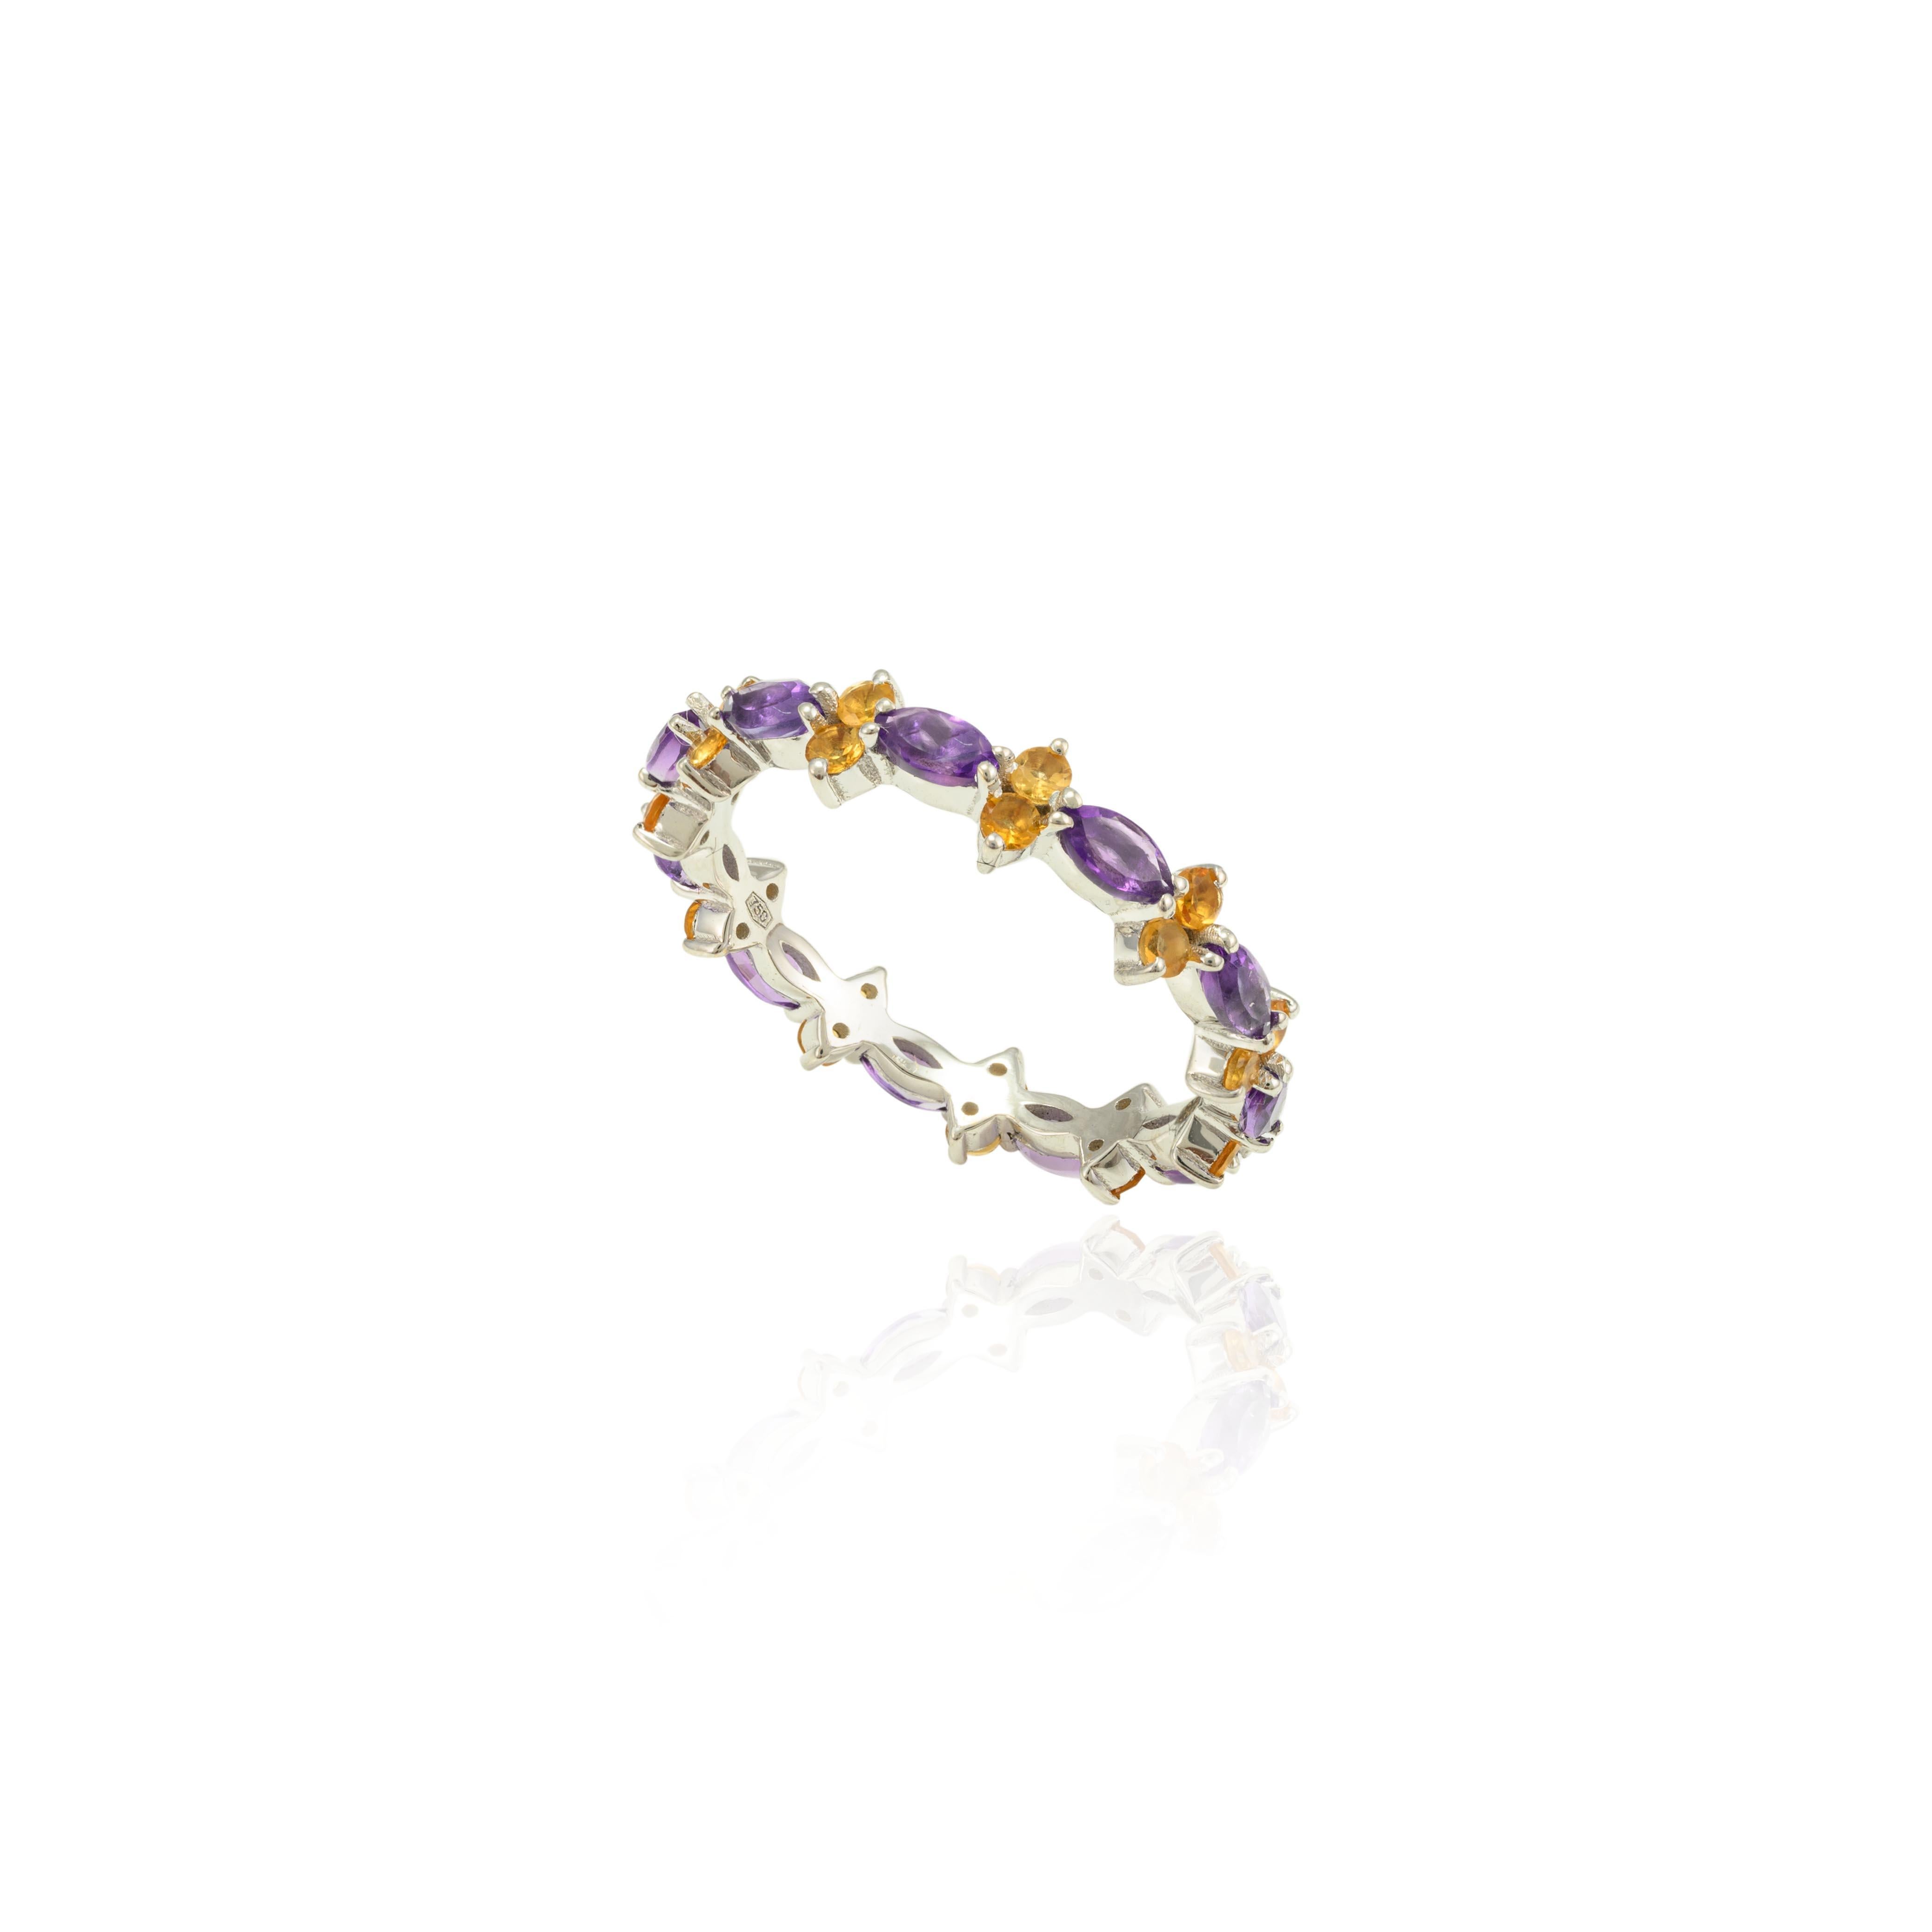 For Sale:  Asymmetrical Citrine and Amethyst Stacking Band Ring in 18k Solid White Gold 3